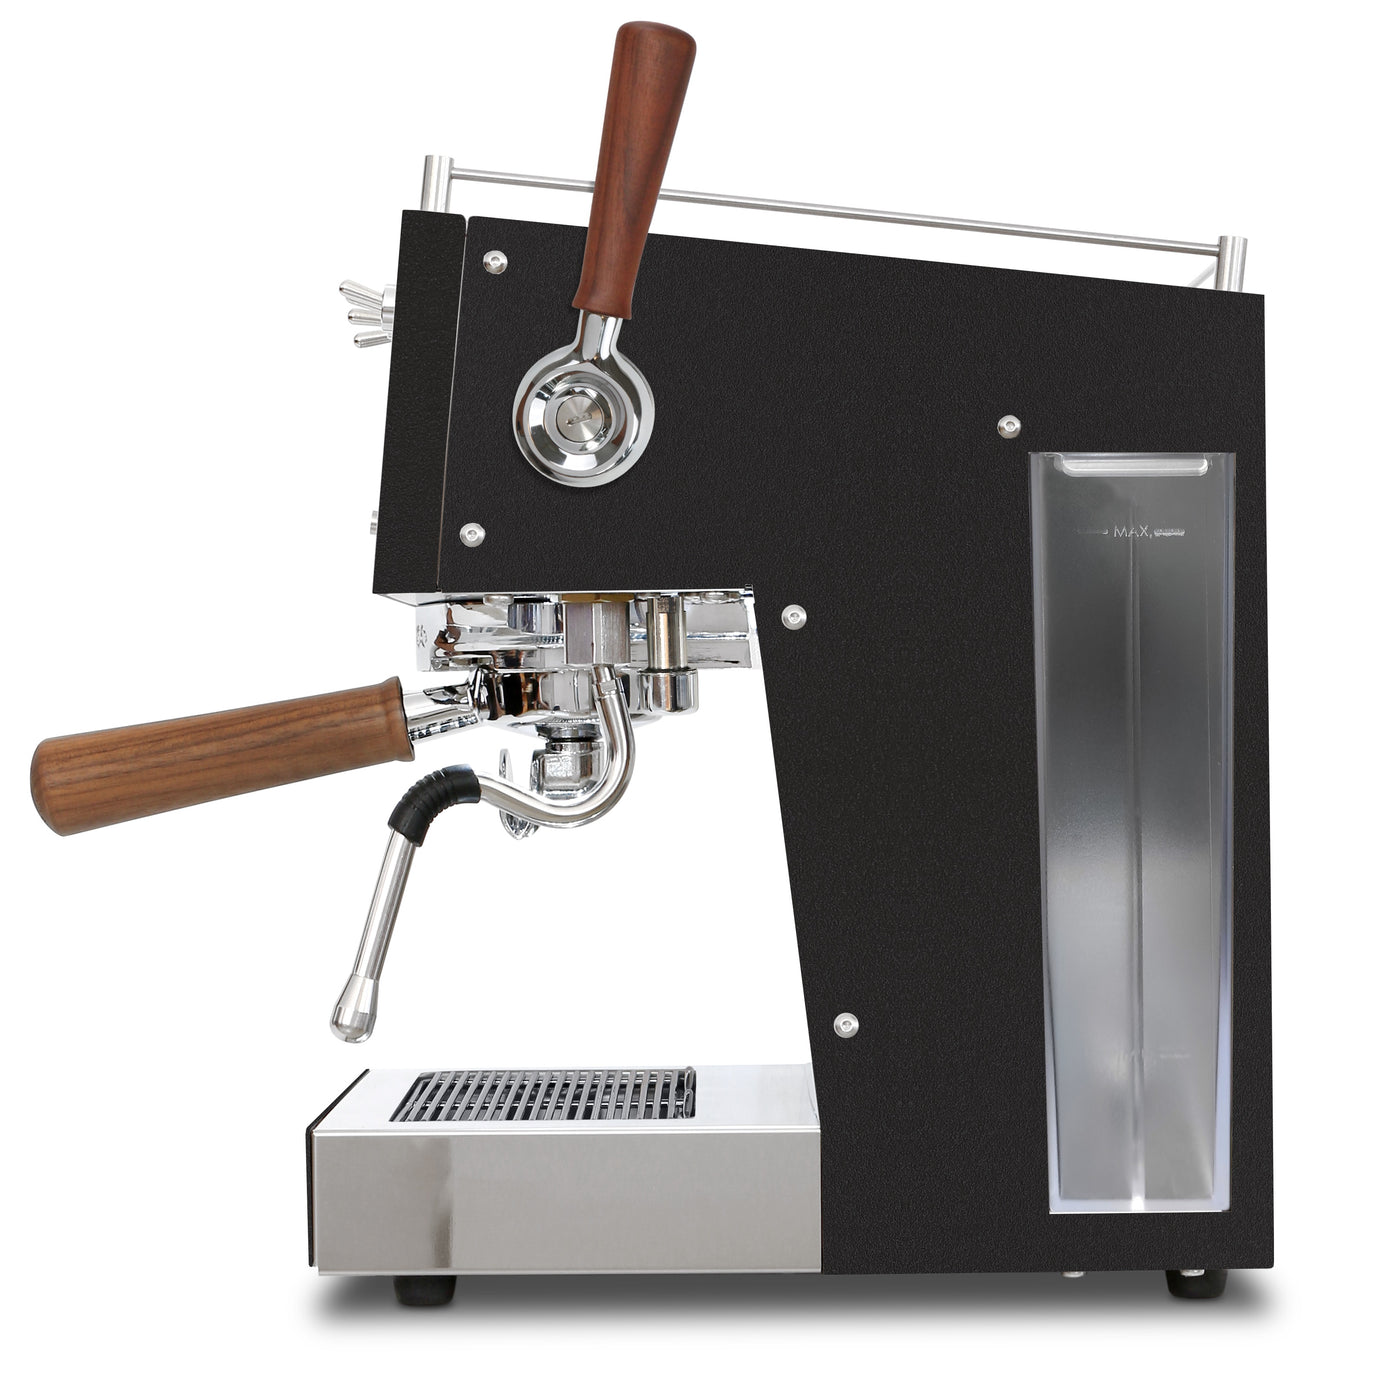 Ascaso Steel Duo Plus in Black and Walnut wood - view from the right hand side of the Espresso machine